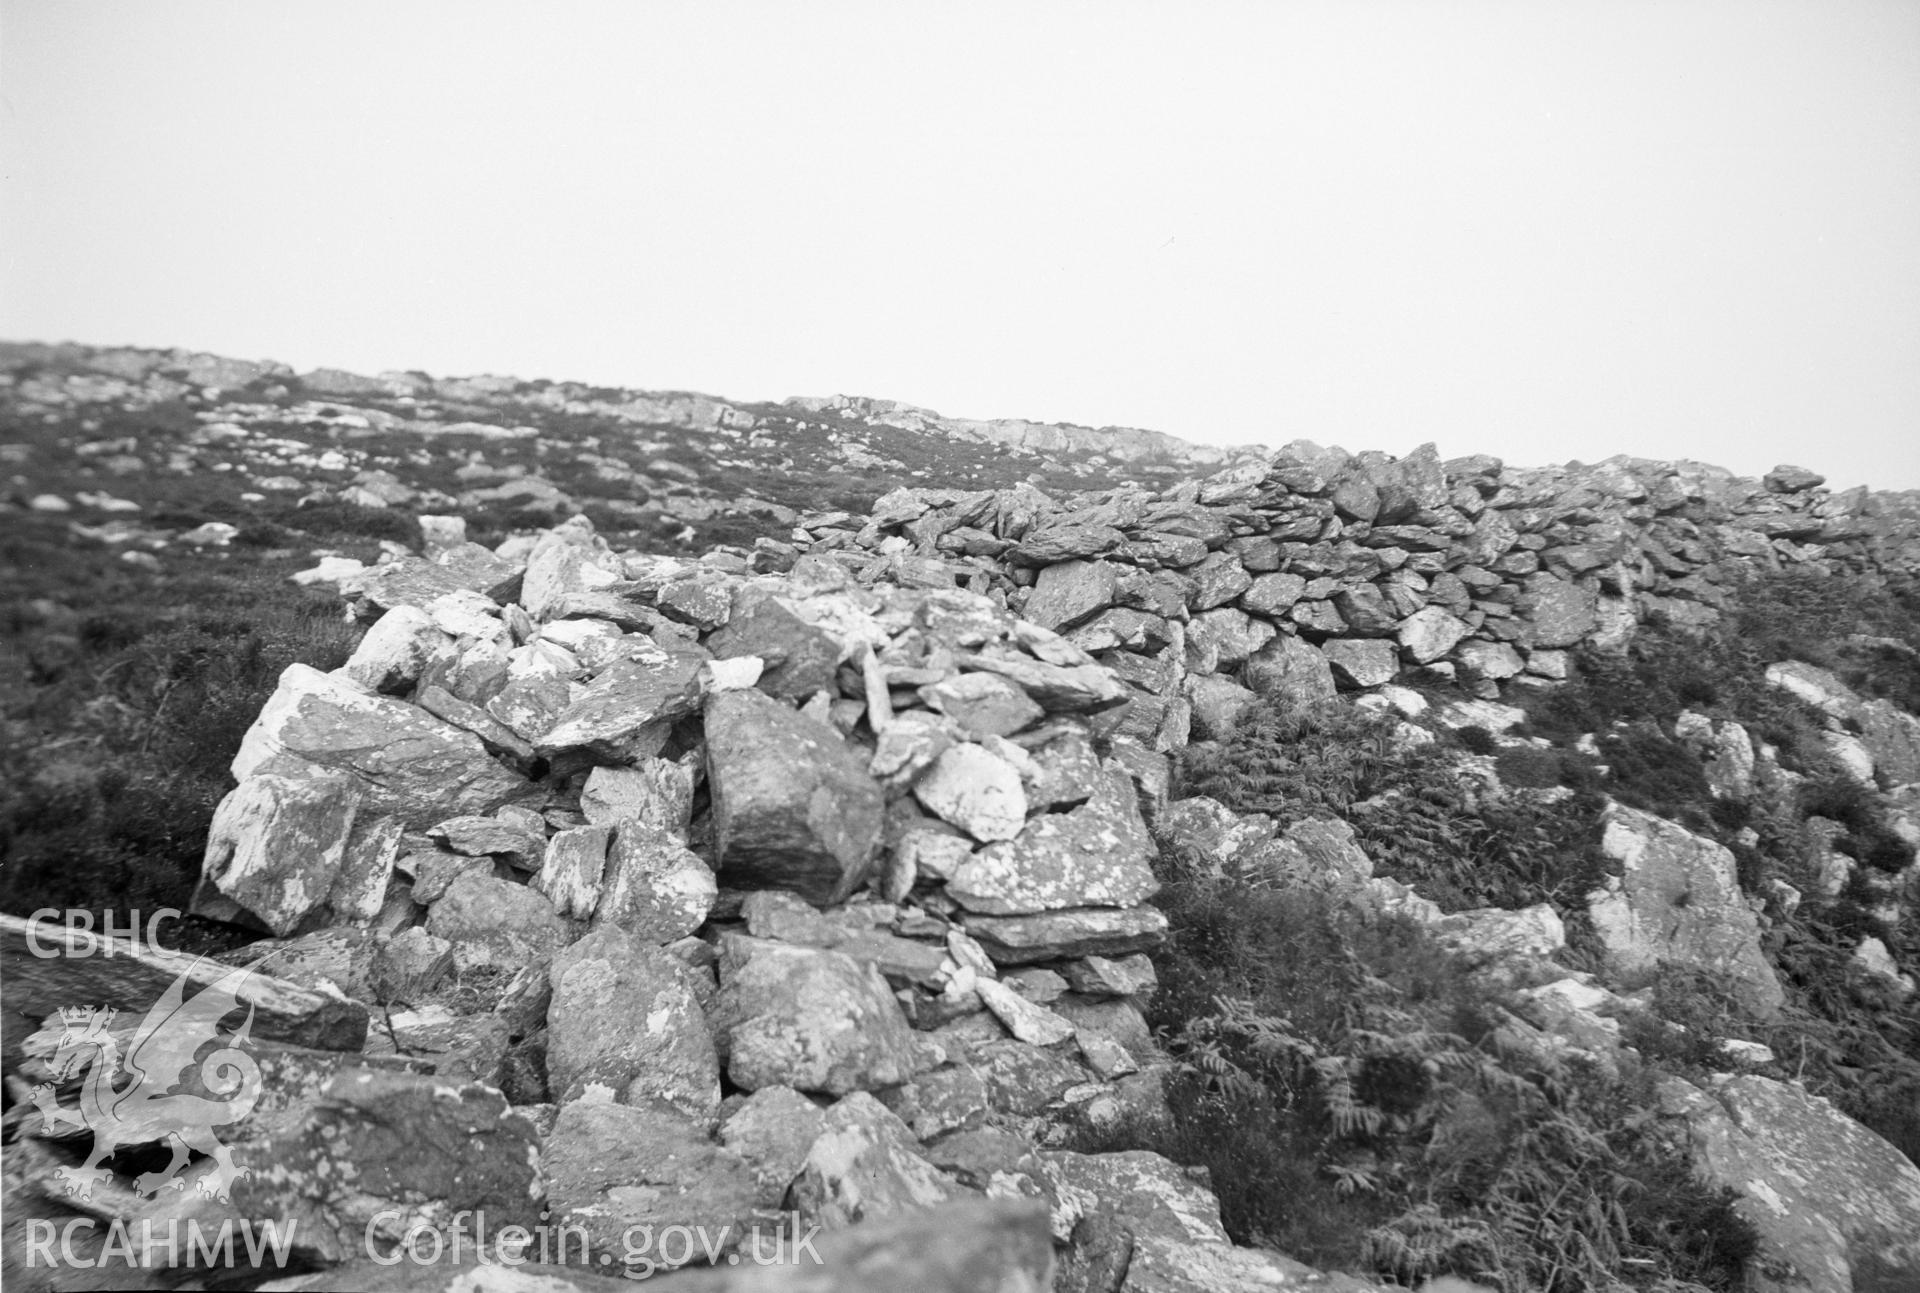 Digital copy of a nitrate negative showing view of Caer y Twr.